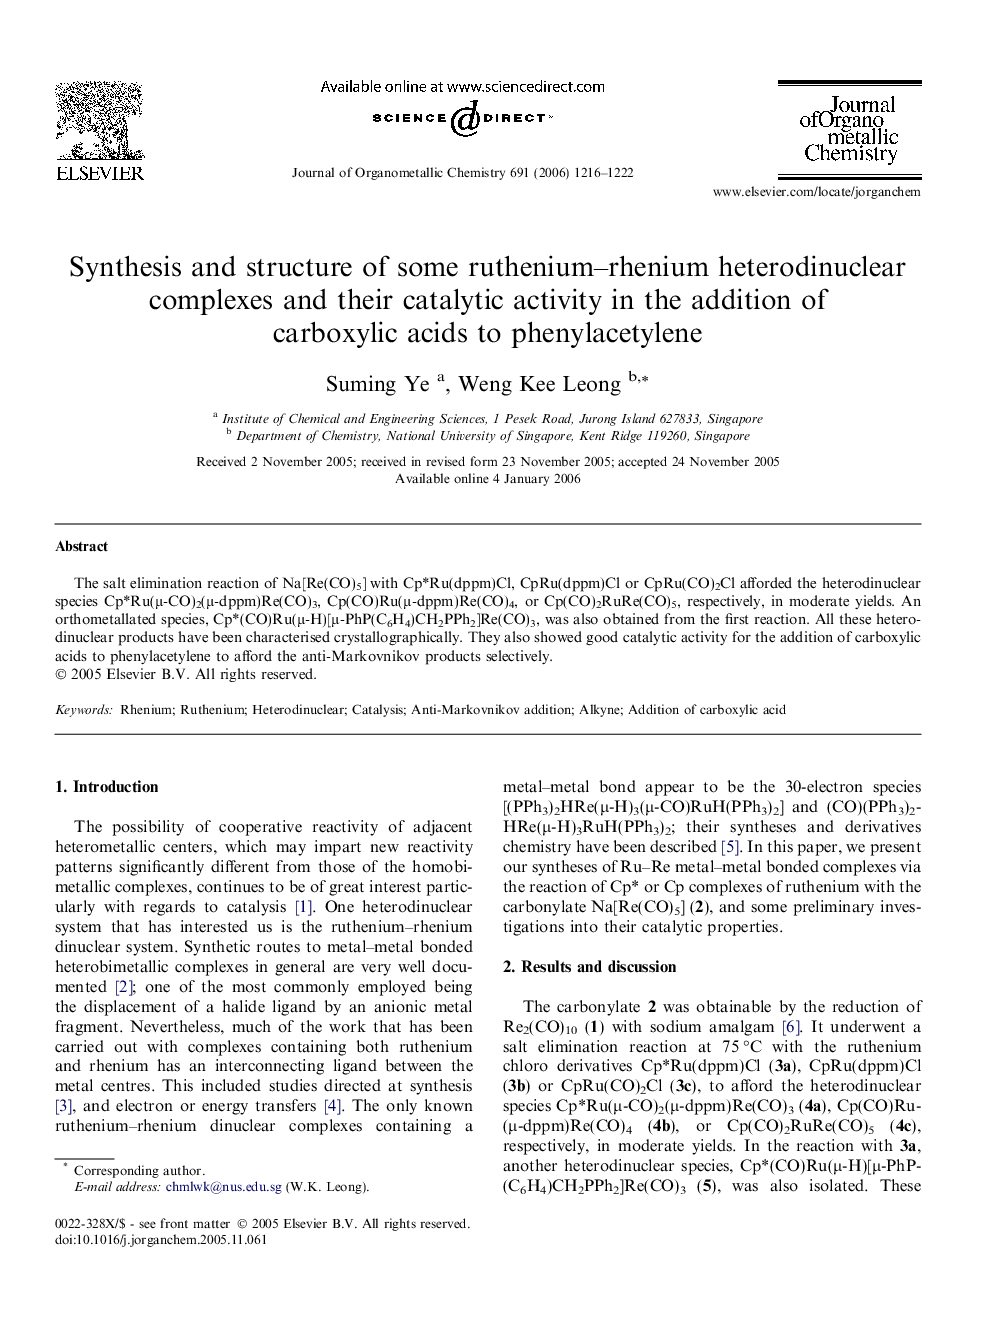 Synthesis and structure of some ruthenium–rhenium heterodinuclear complexes and their catalytic activity in the addition of carboxylic acids to phenylacetylene